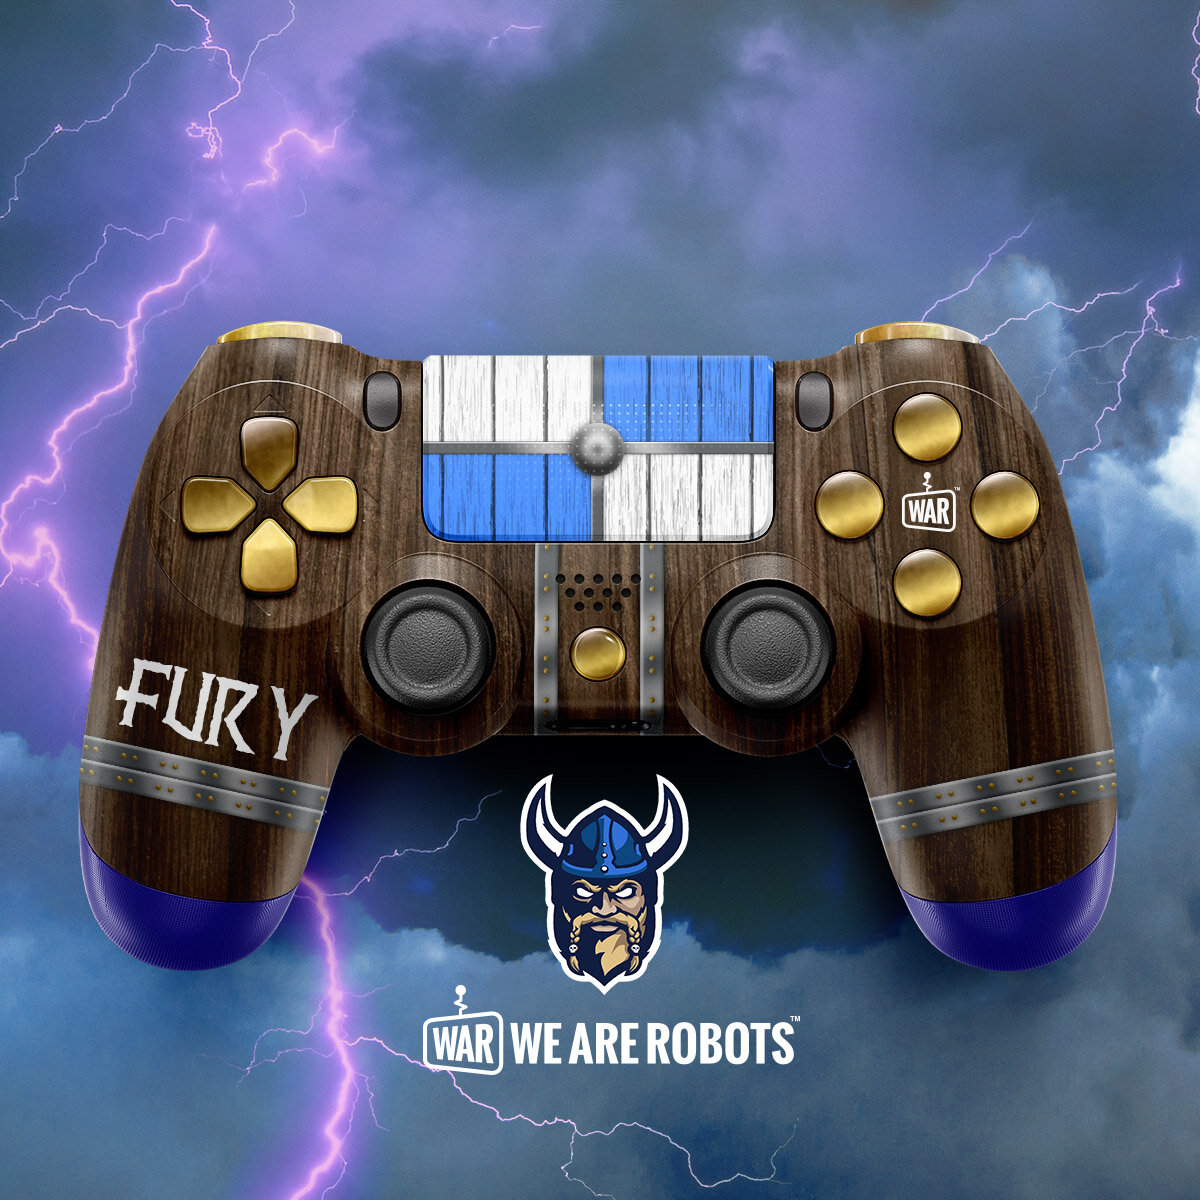 Fury -Ps4_Controller_Front copy.jpg